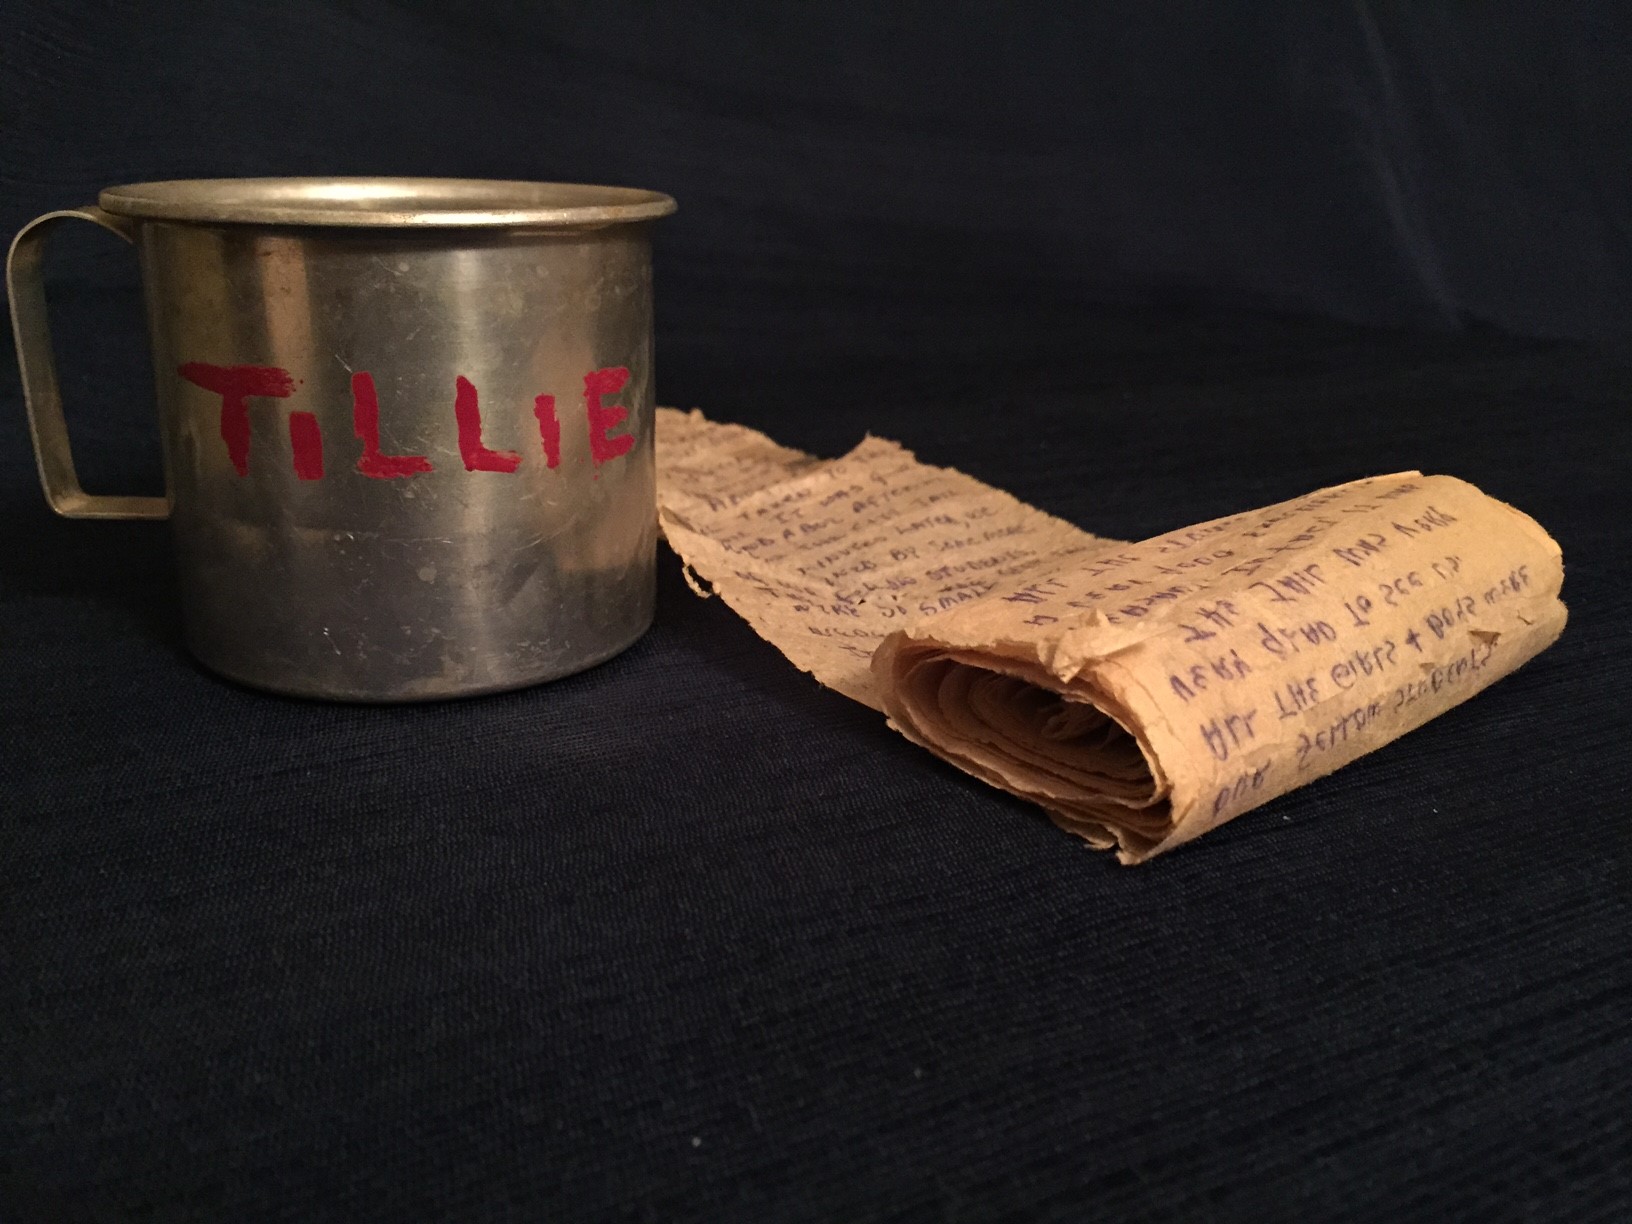 Tin Cup and Letter Mentioned in Commencement Speech